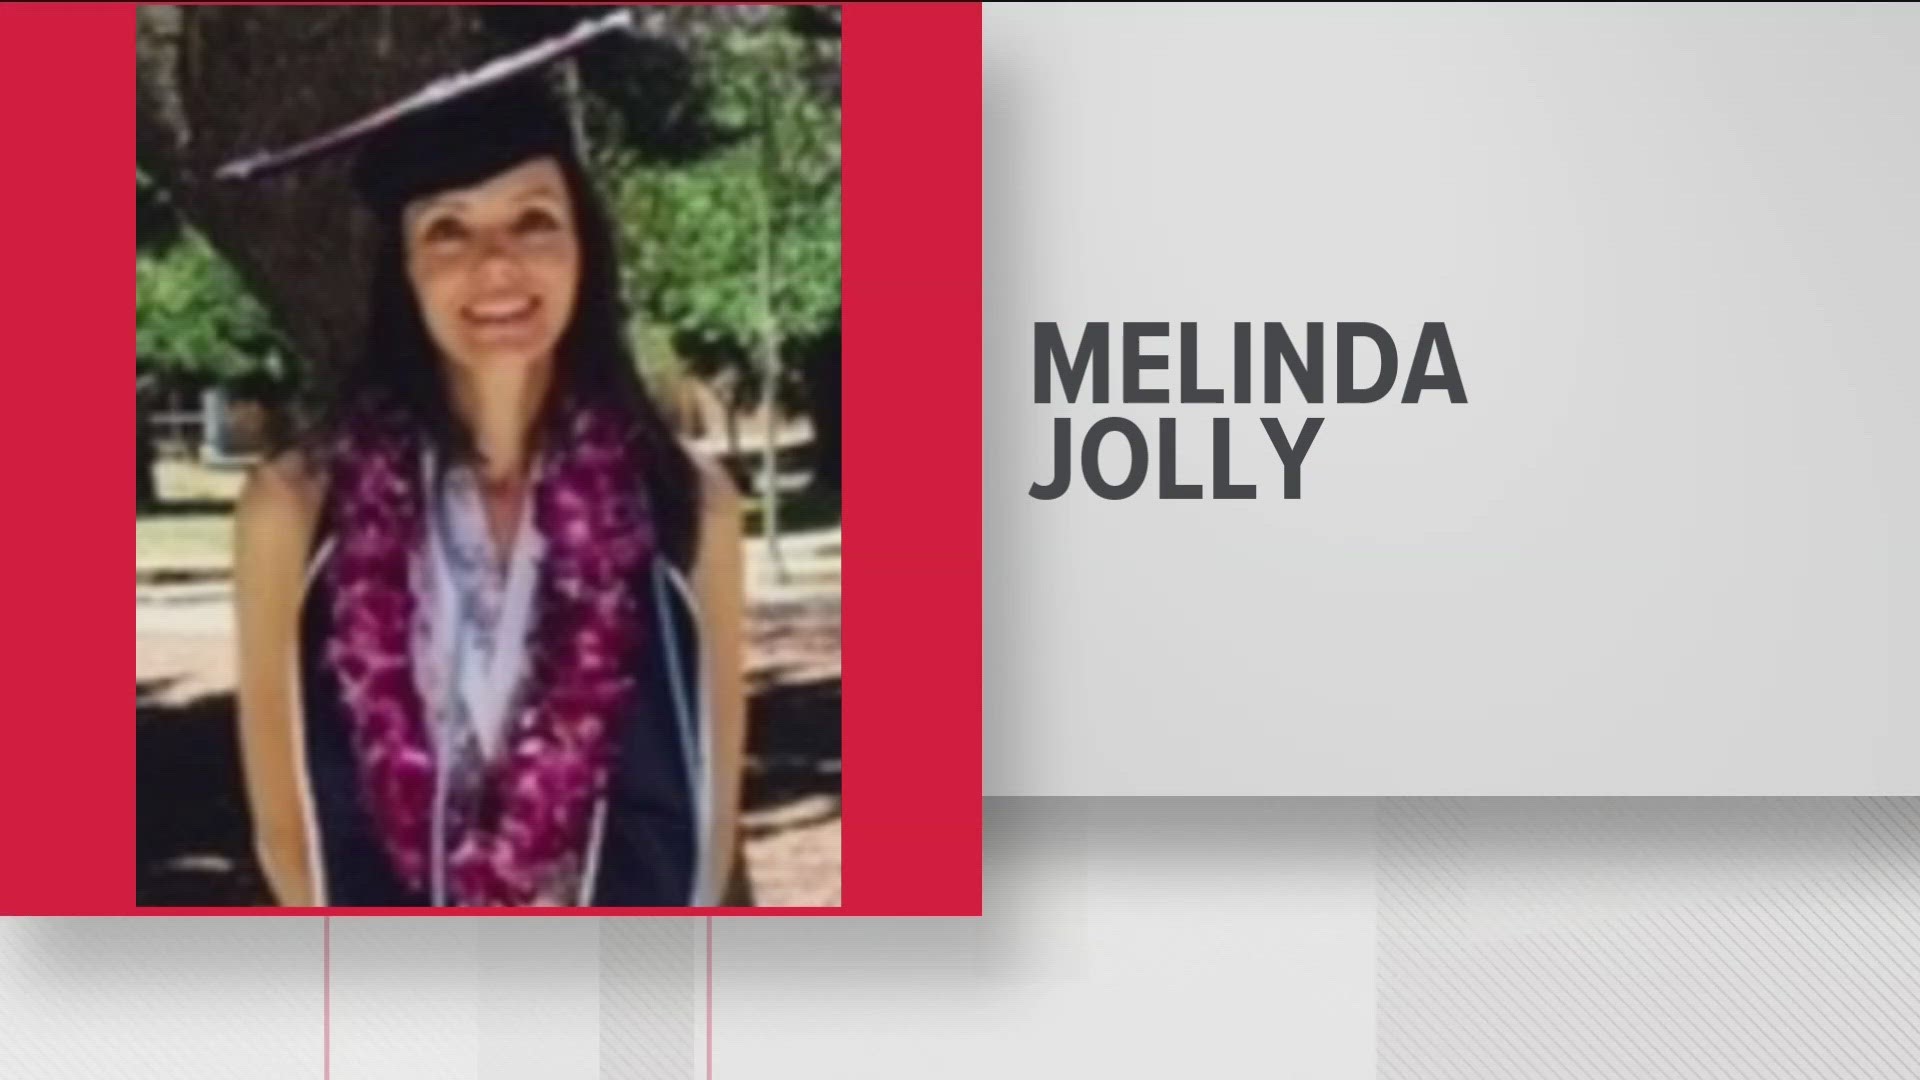 Law enforcement added that a family member discovered 44-year-old Melinda Jolly's body on Jan. 17 at her residence located in the 3200 block of Perch Drive.